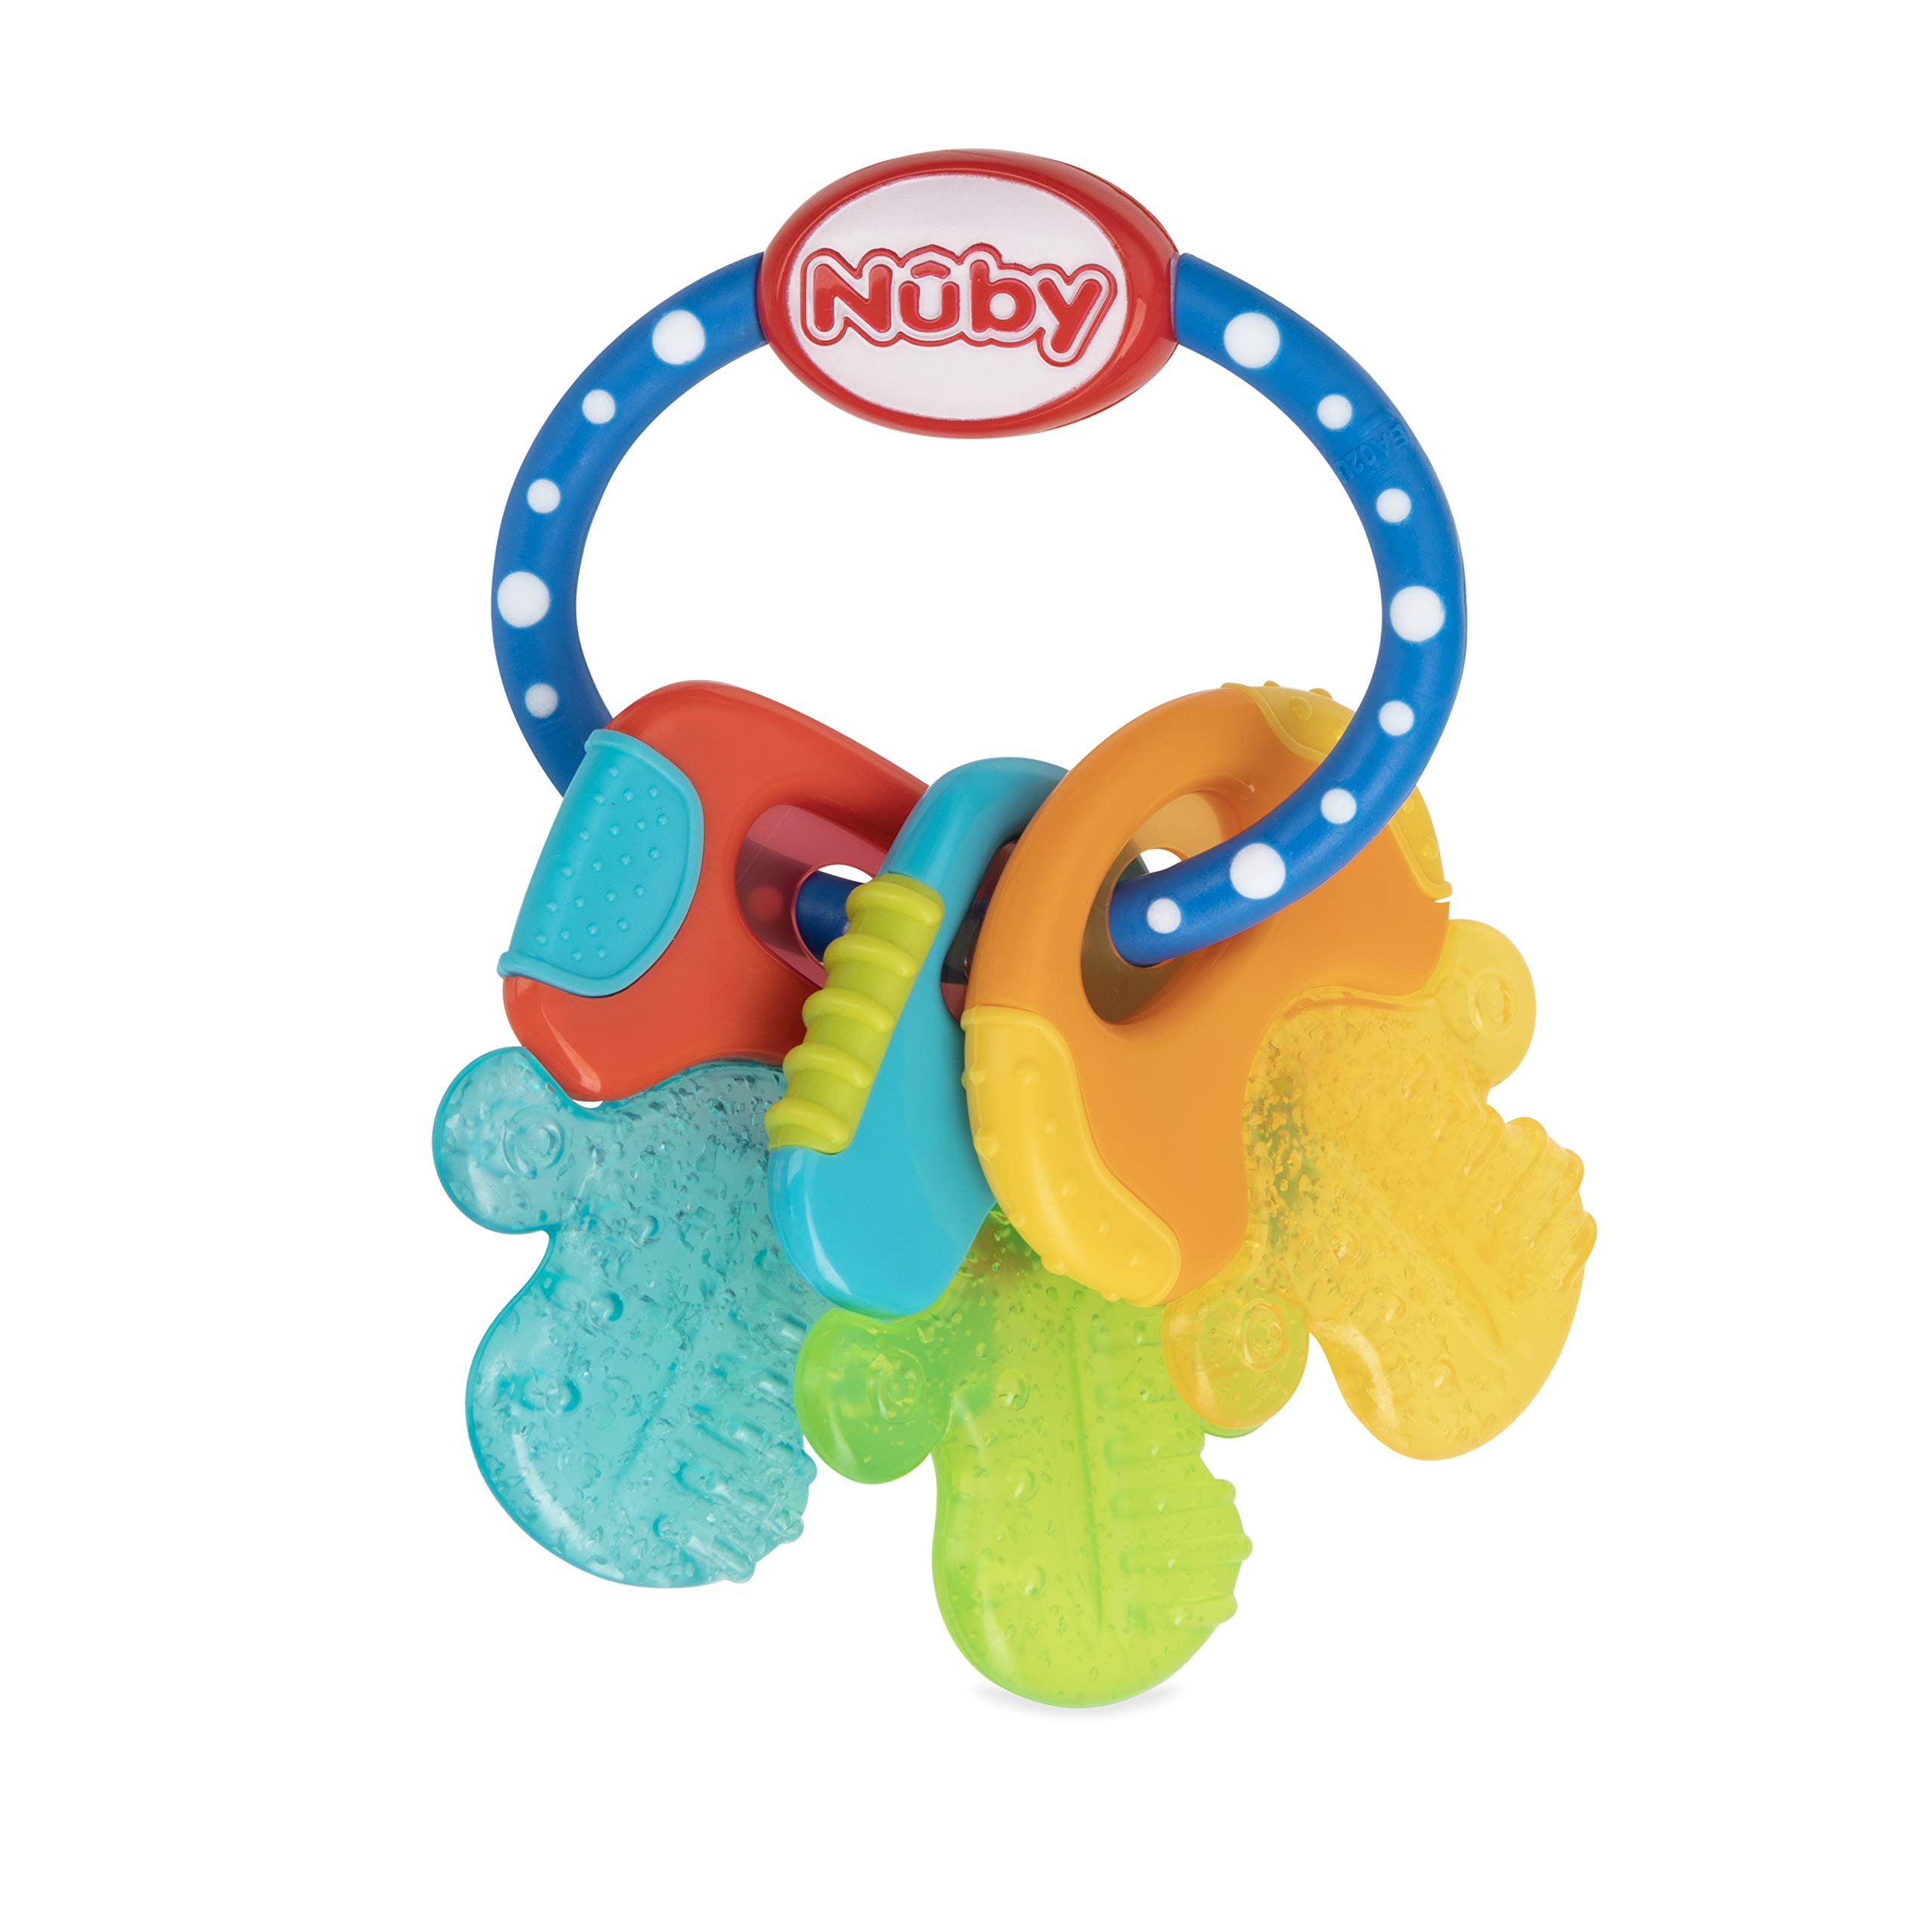 Nuby IcyBite Multicolor Keys Textured and Soothing Teether $3.48, The World of Eric Carle: The Very Hungry Caterpillar Teether $4.98 + Free Shipping w/ Prime or on $35+